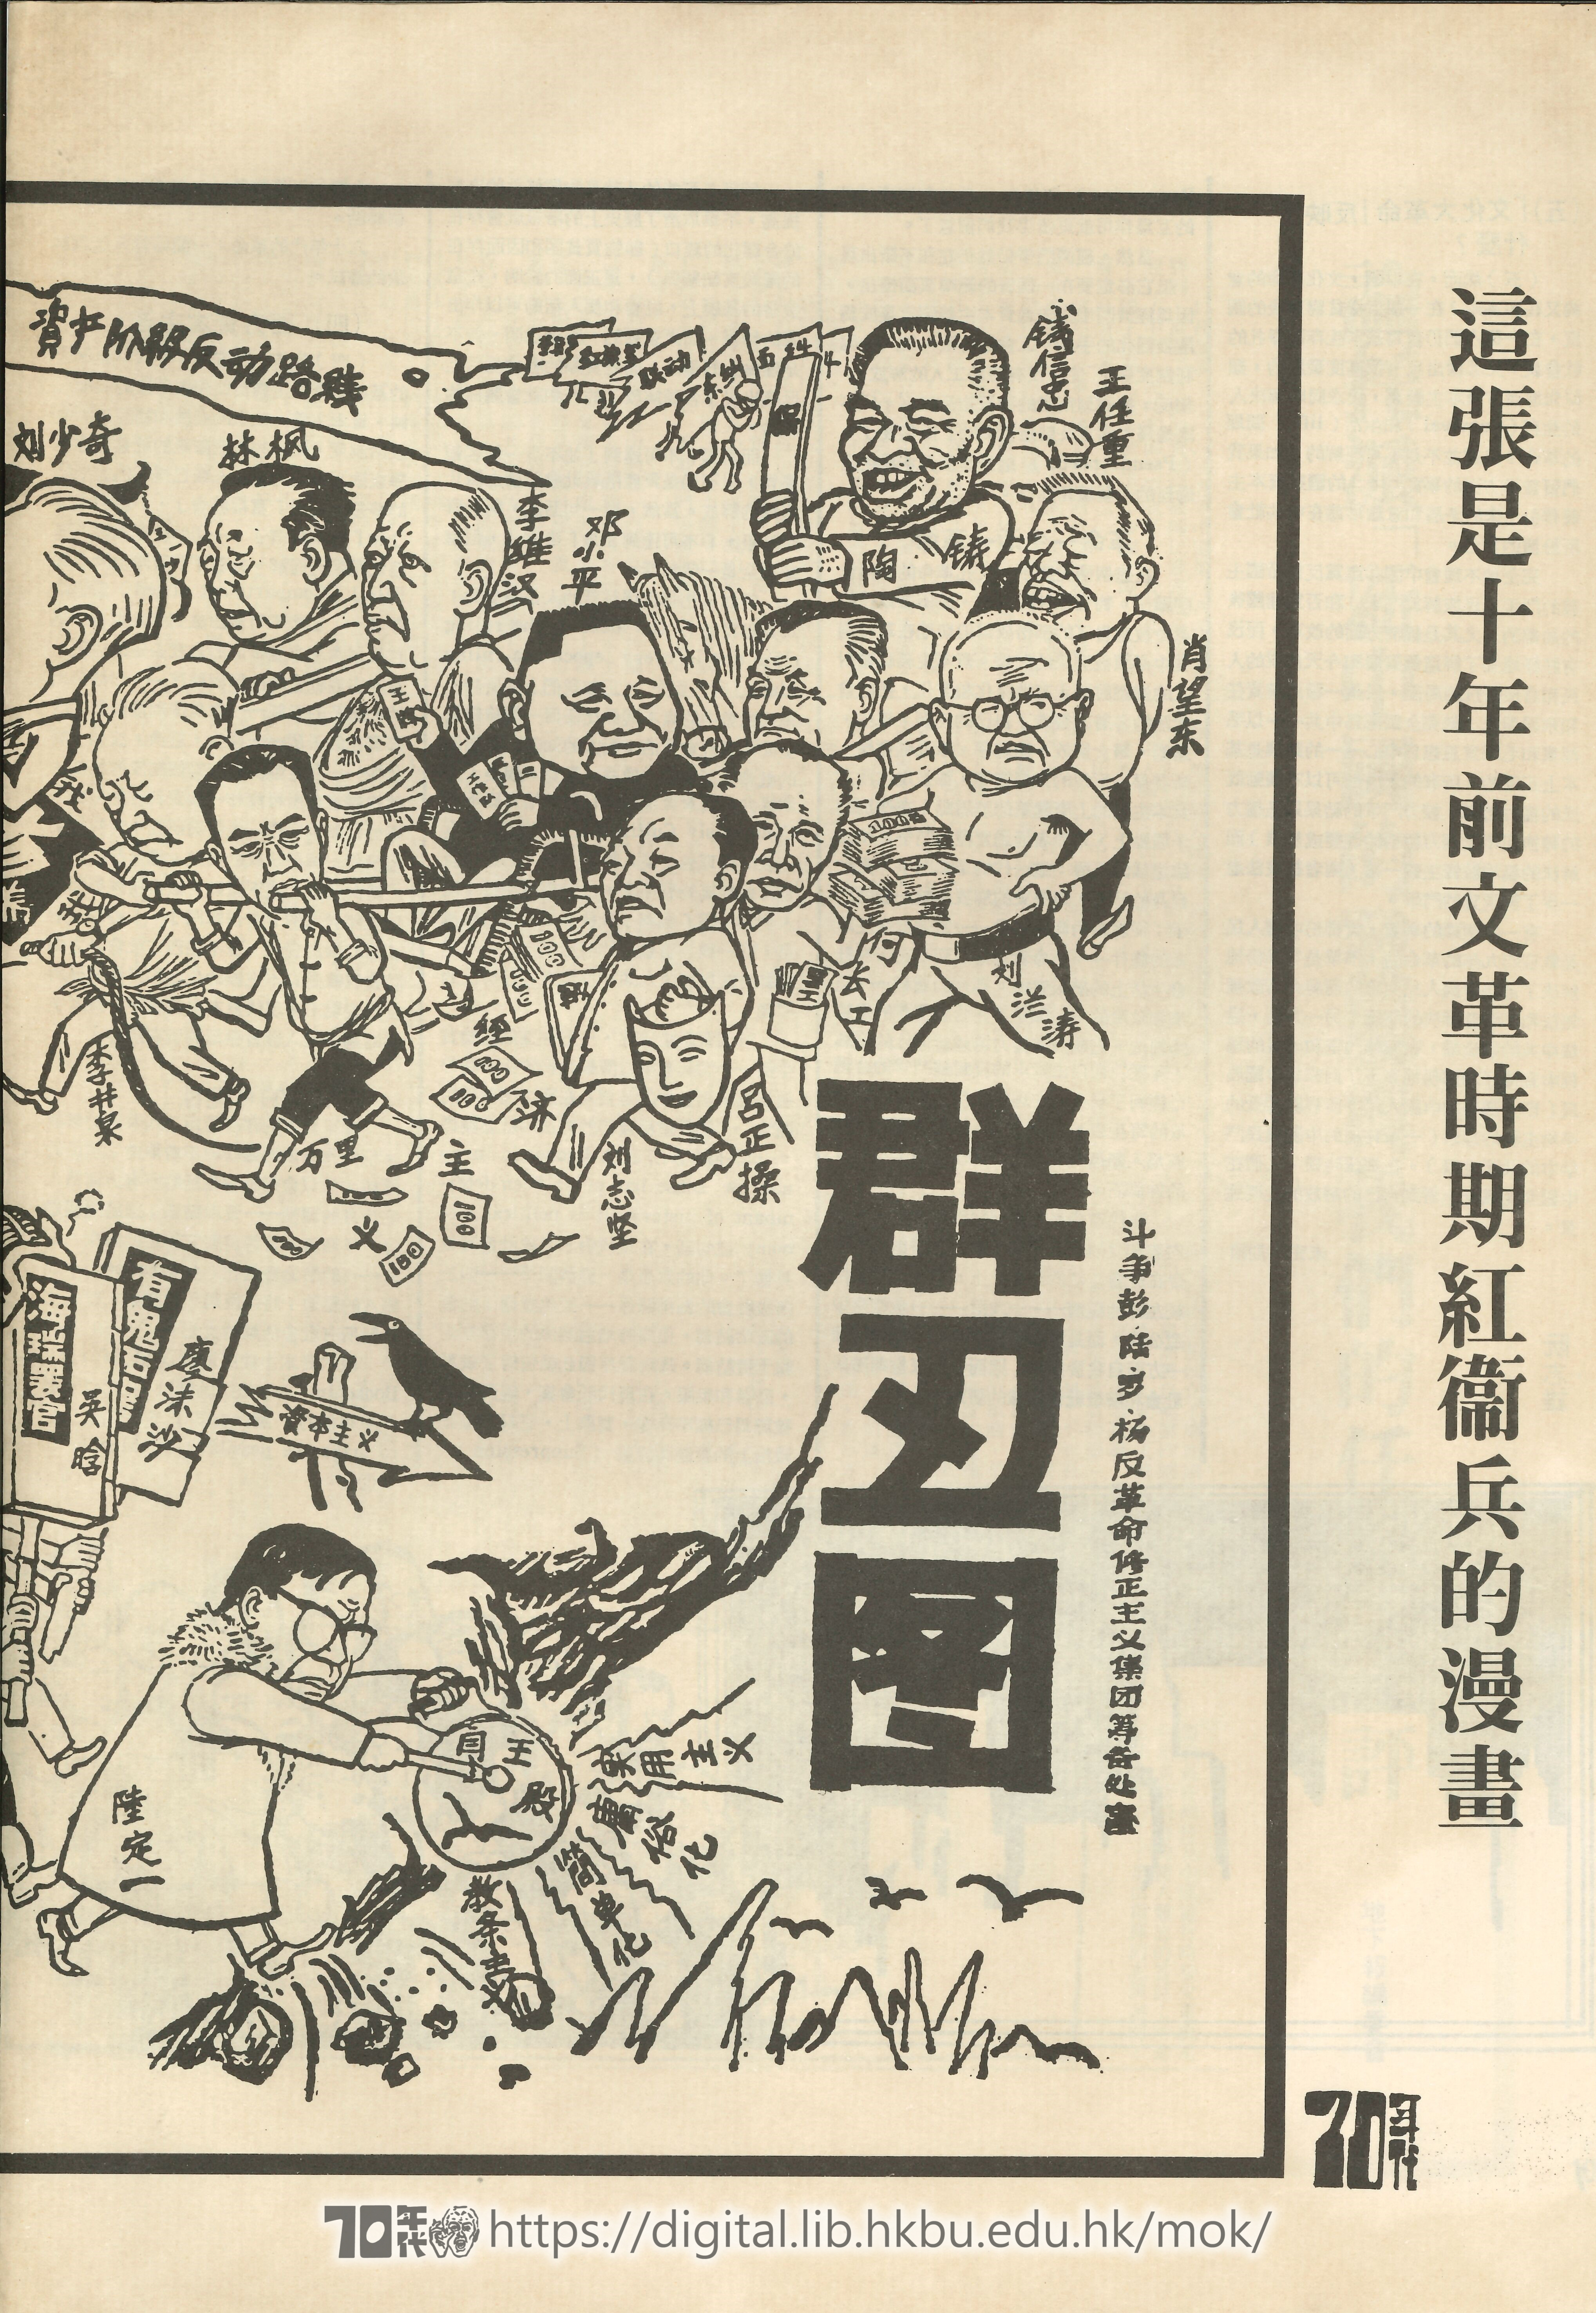  ��������������������� Comics by red guards of the Cultural Revolution 10 years ago  